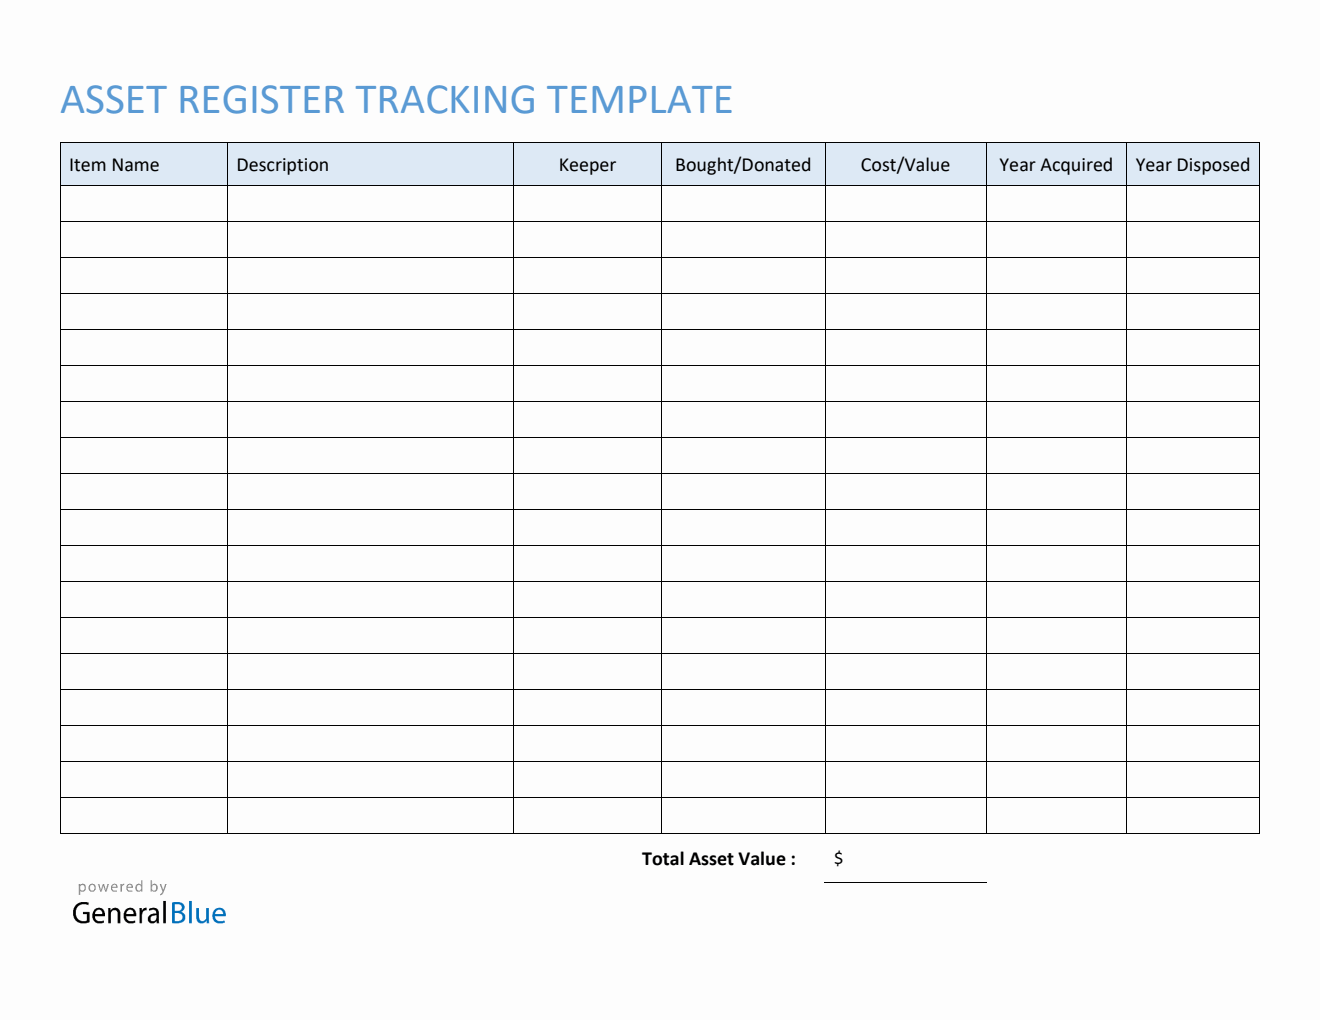 Asset Register Tracking Template in PDF